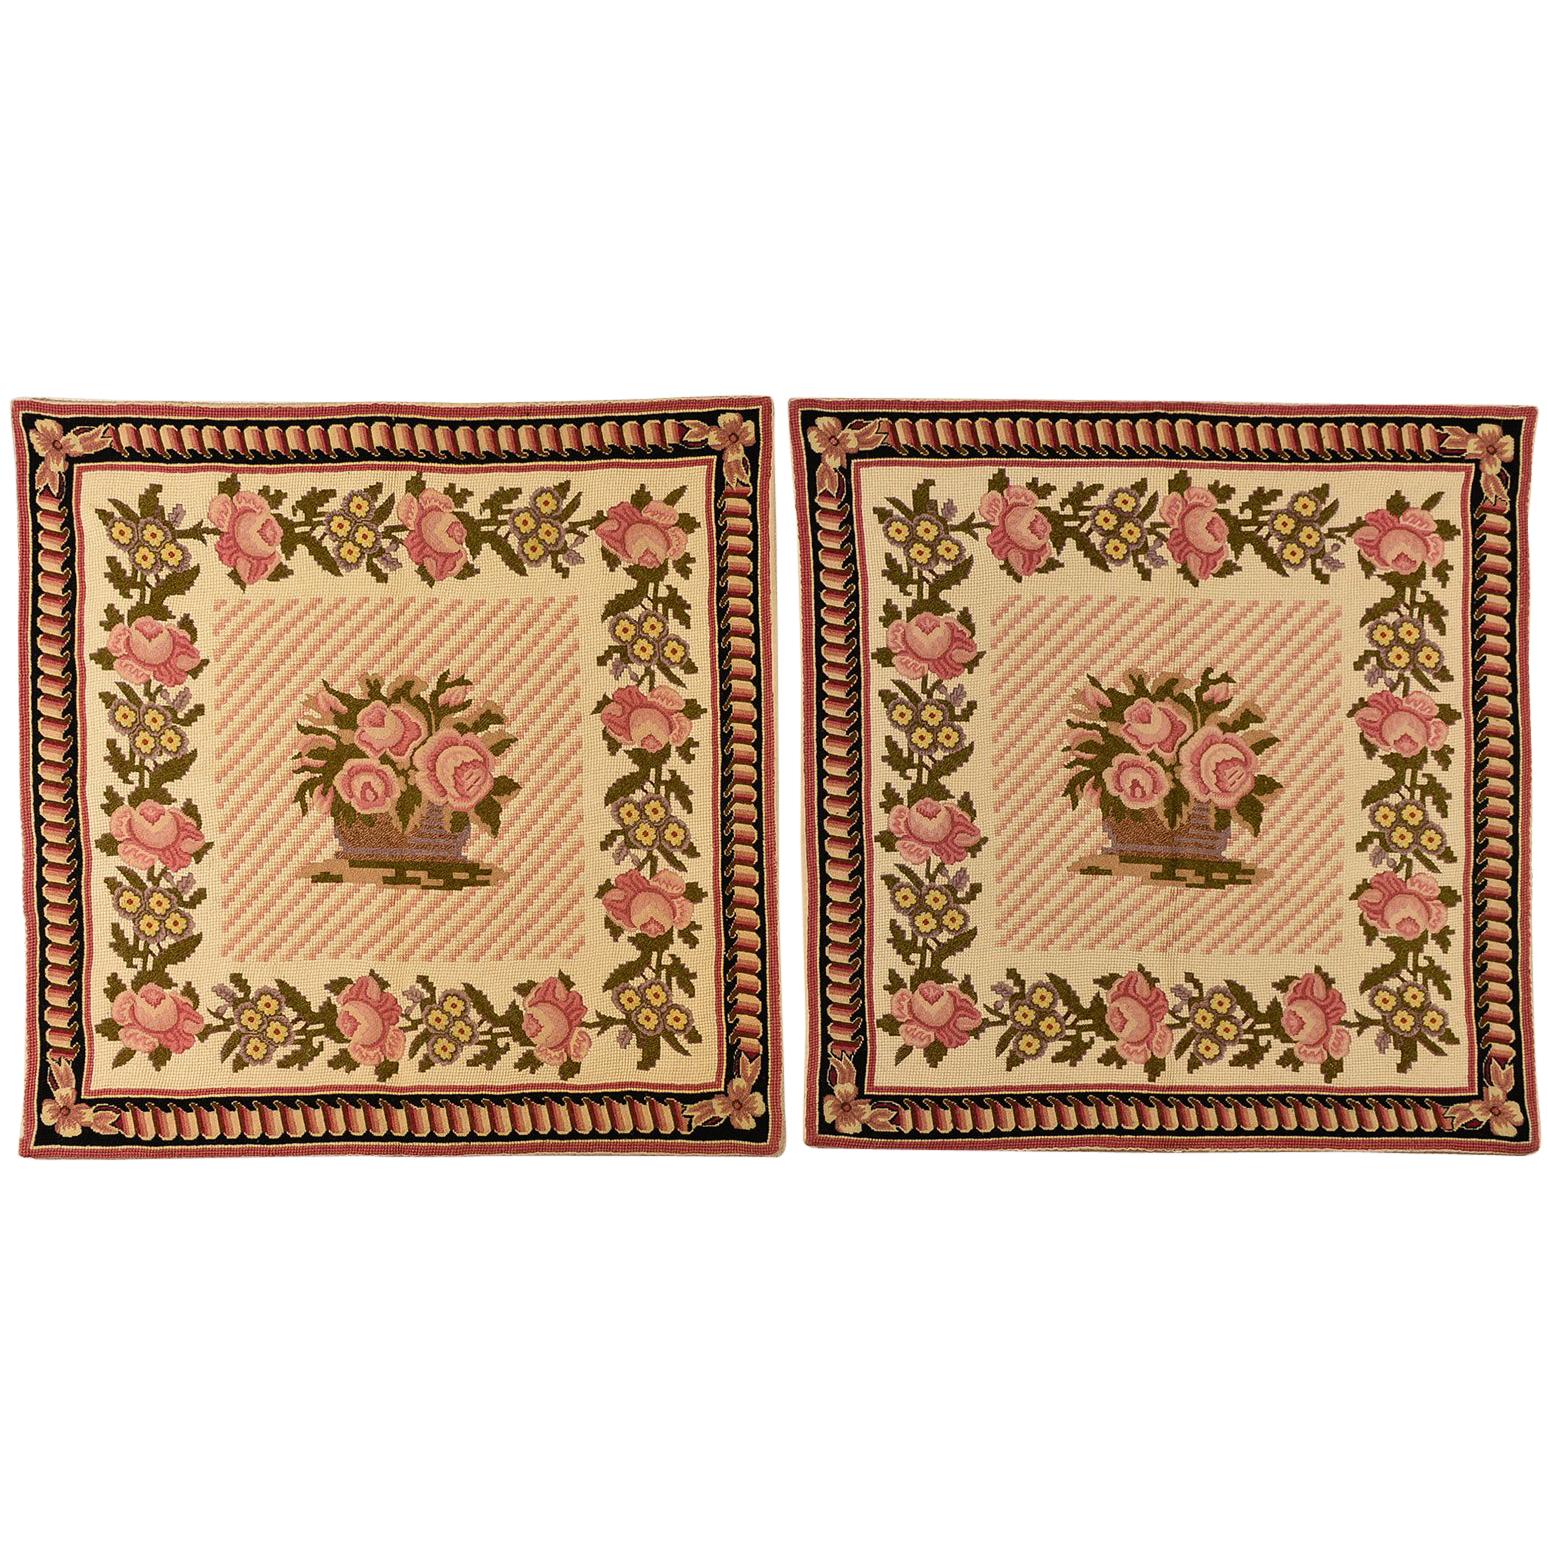  Pair of Needle Point Bedside Carpets or Large Cushions